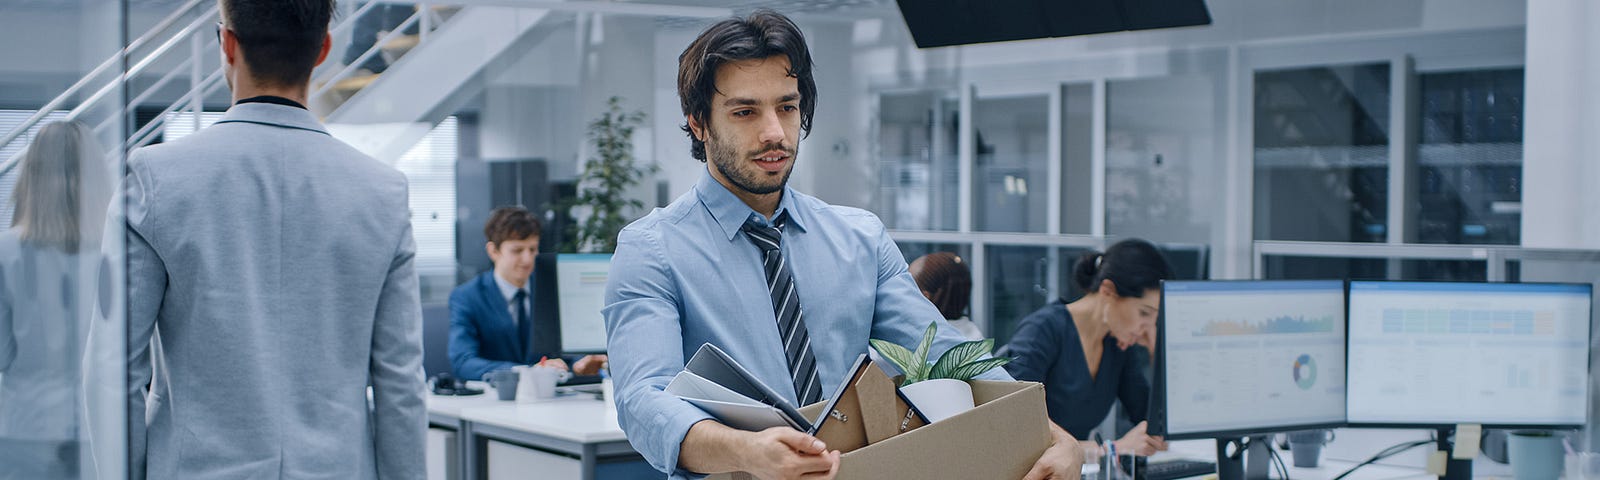 Man wearing tie in office walking out with box in arms after just being laid off